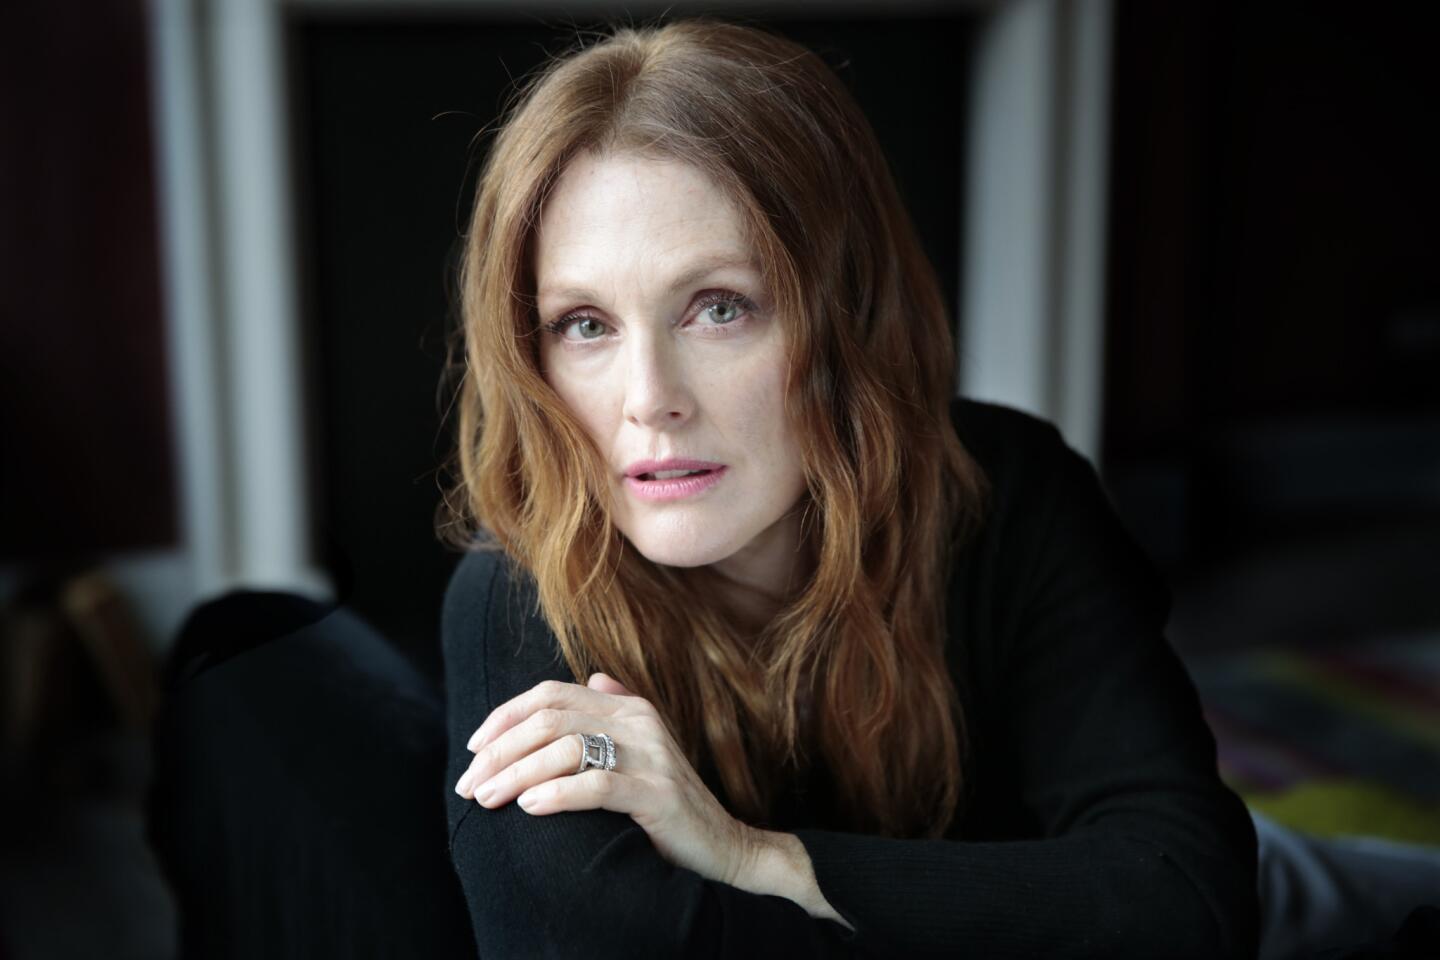 Julianne Moore, an Academy Award nominee for "Still Alice," has had a long and varied career in film and TV that began on the CBS soap opera "As the World Turns." Here are some highlights.